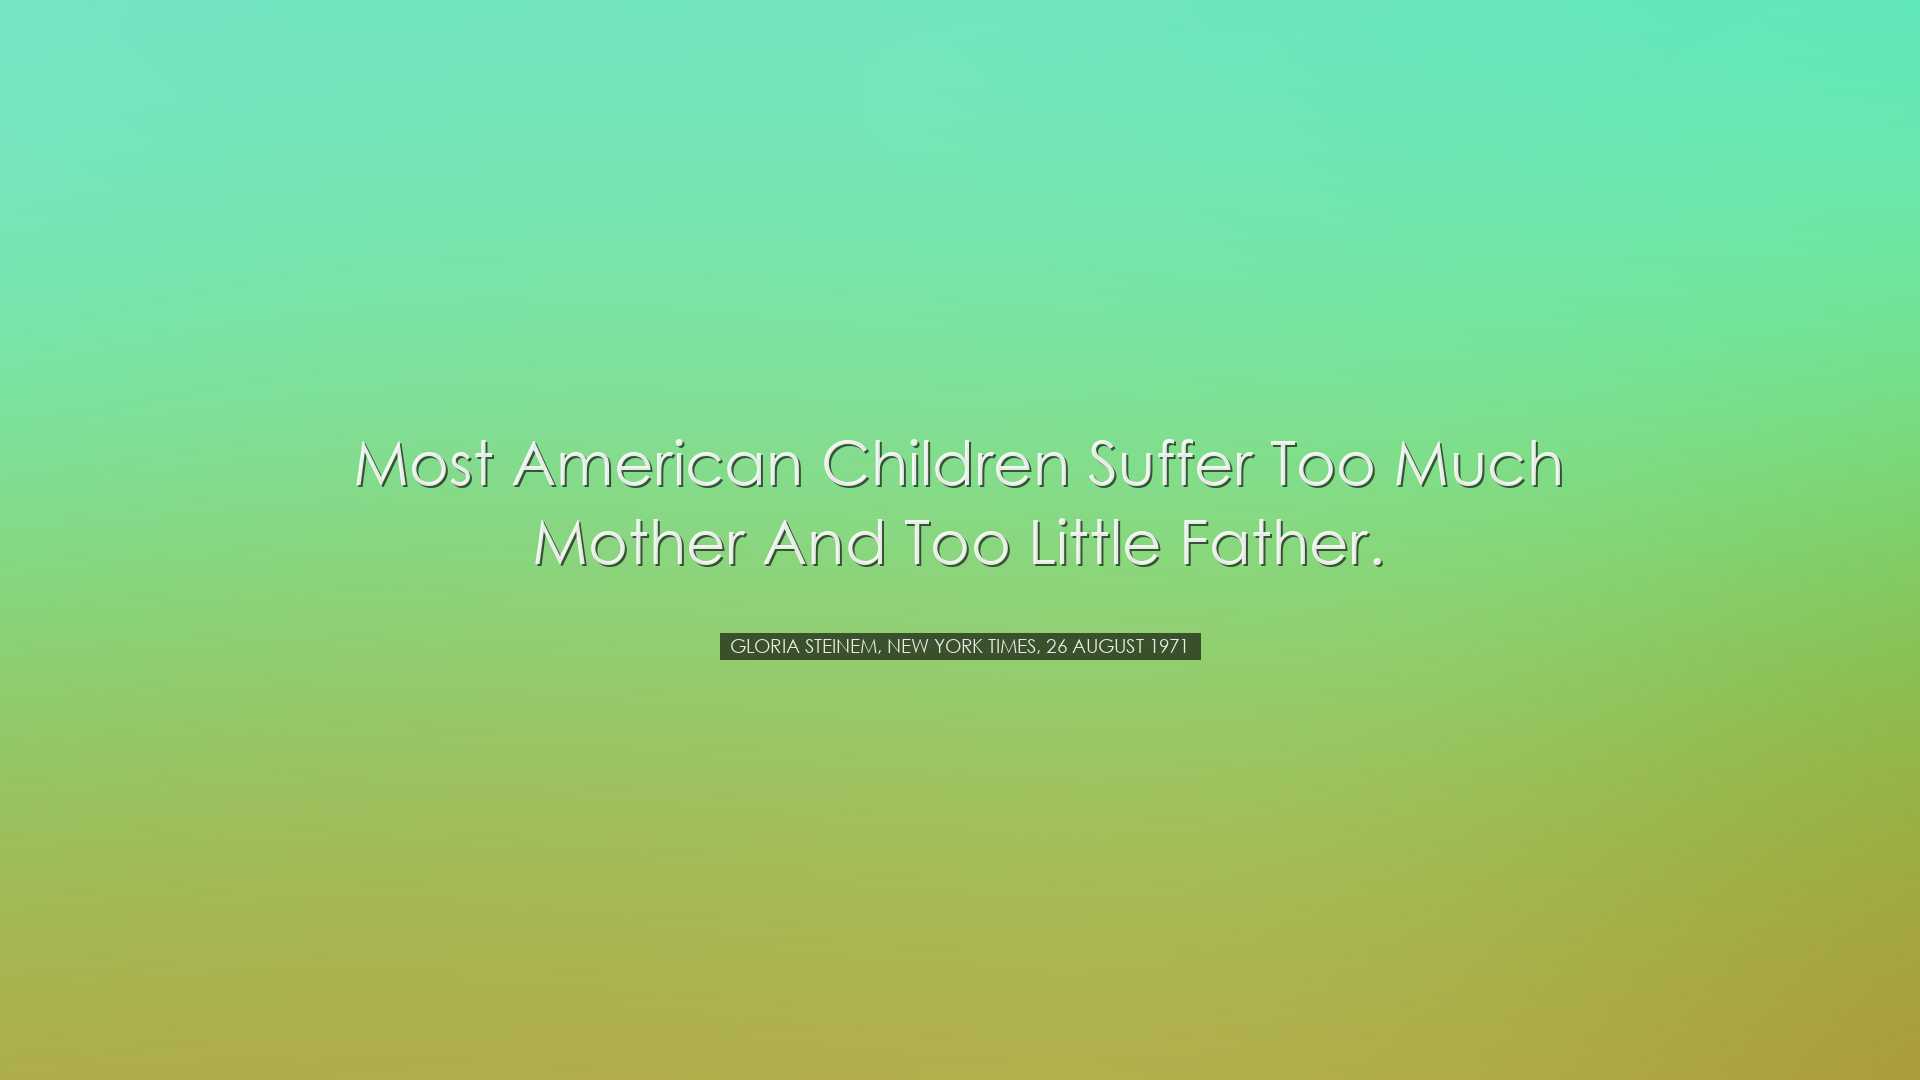 Most American children suffer too much mother and too little fathe